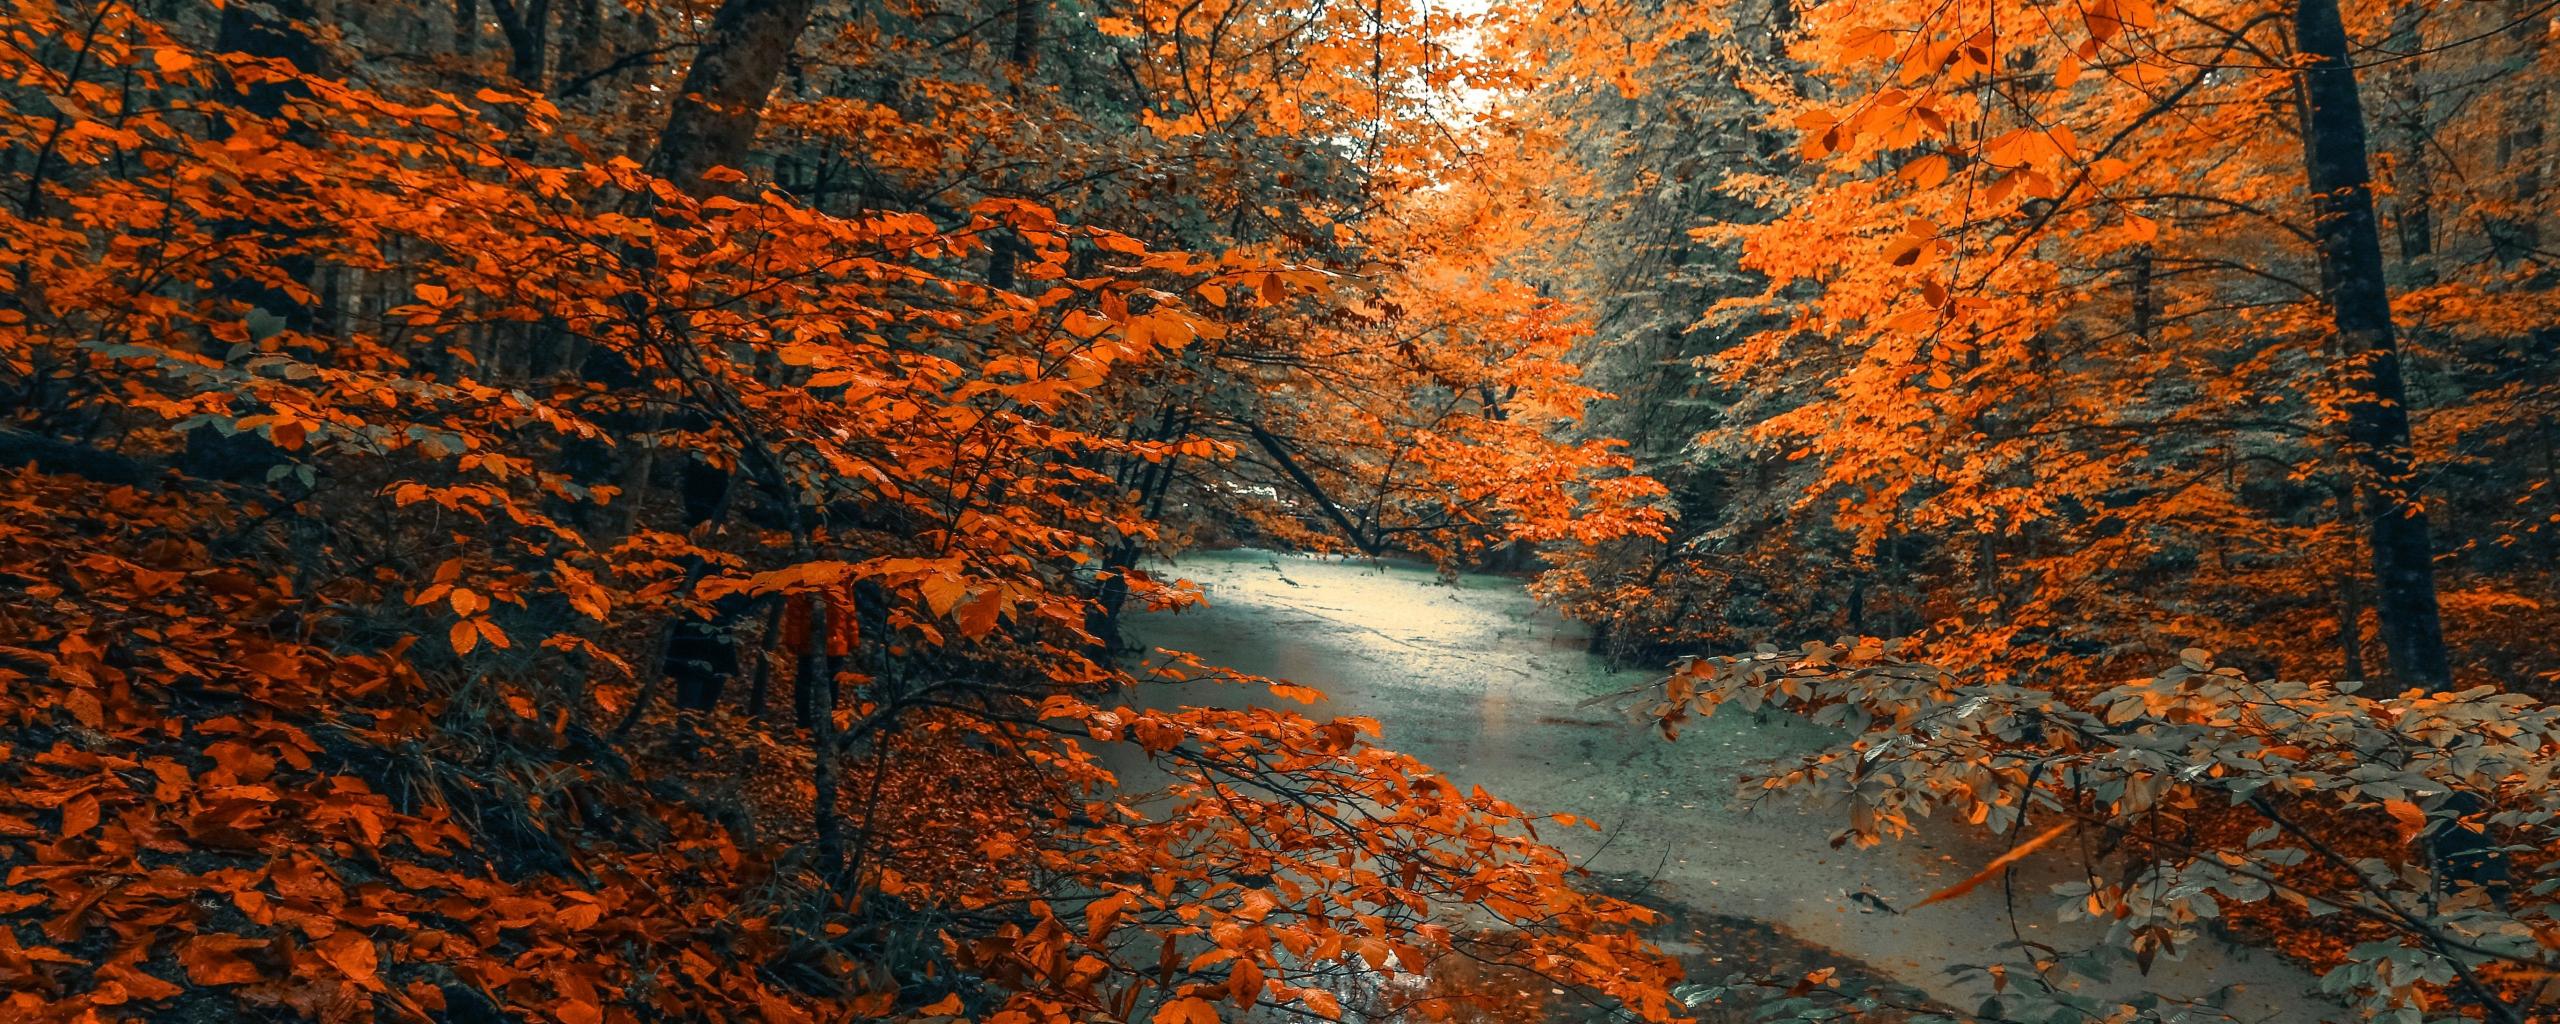 2560X1024 Autumn Wallpapers - Top Free 2560X1024 Autumn Backgrounds ...